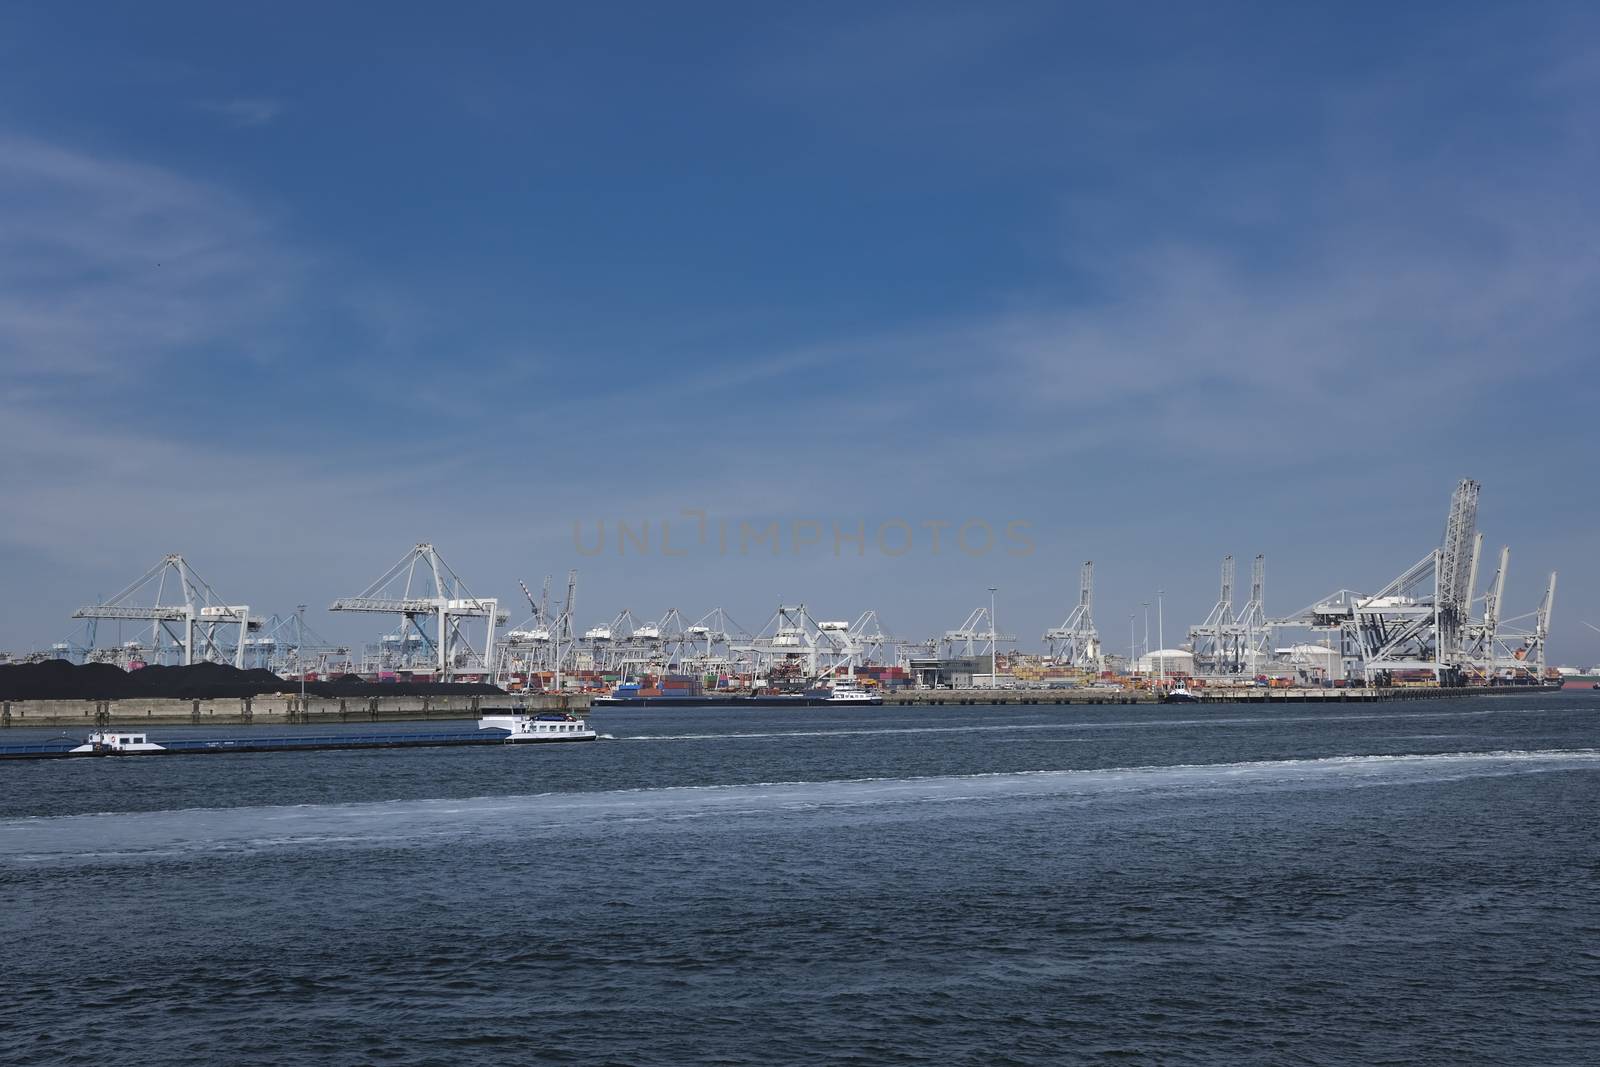 Huge cranes and ships anchored at harbor. International commerci by Tjeerdkruse